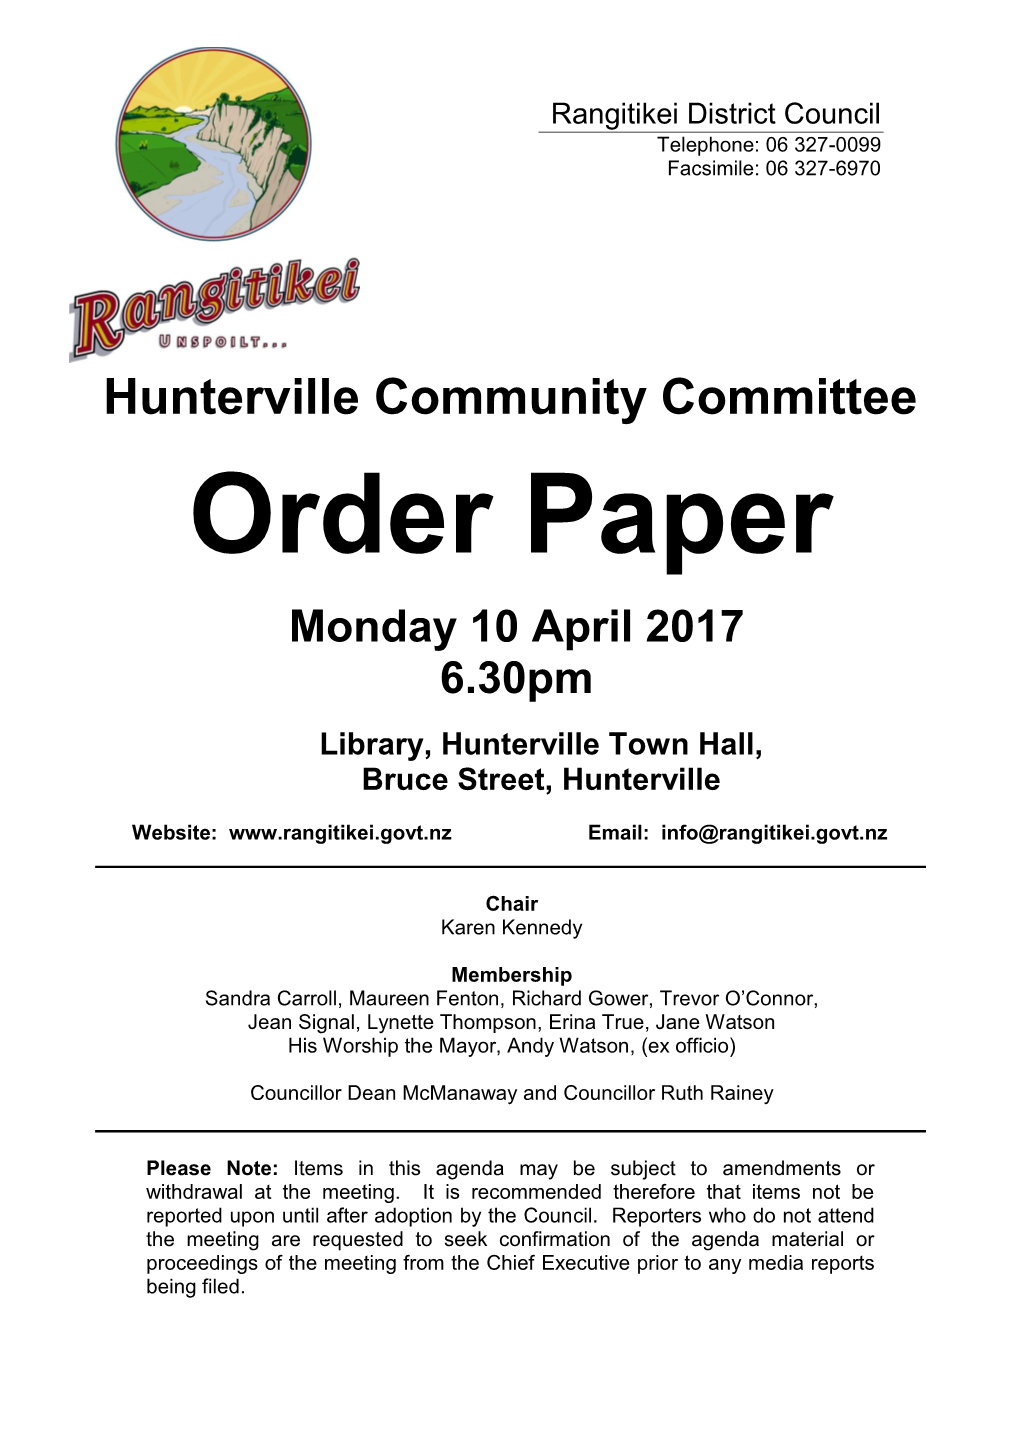 Hunterville Community Committee Order Paper 10 April 2017